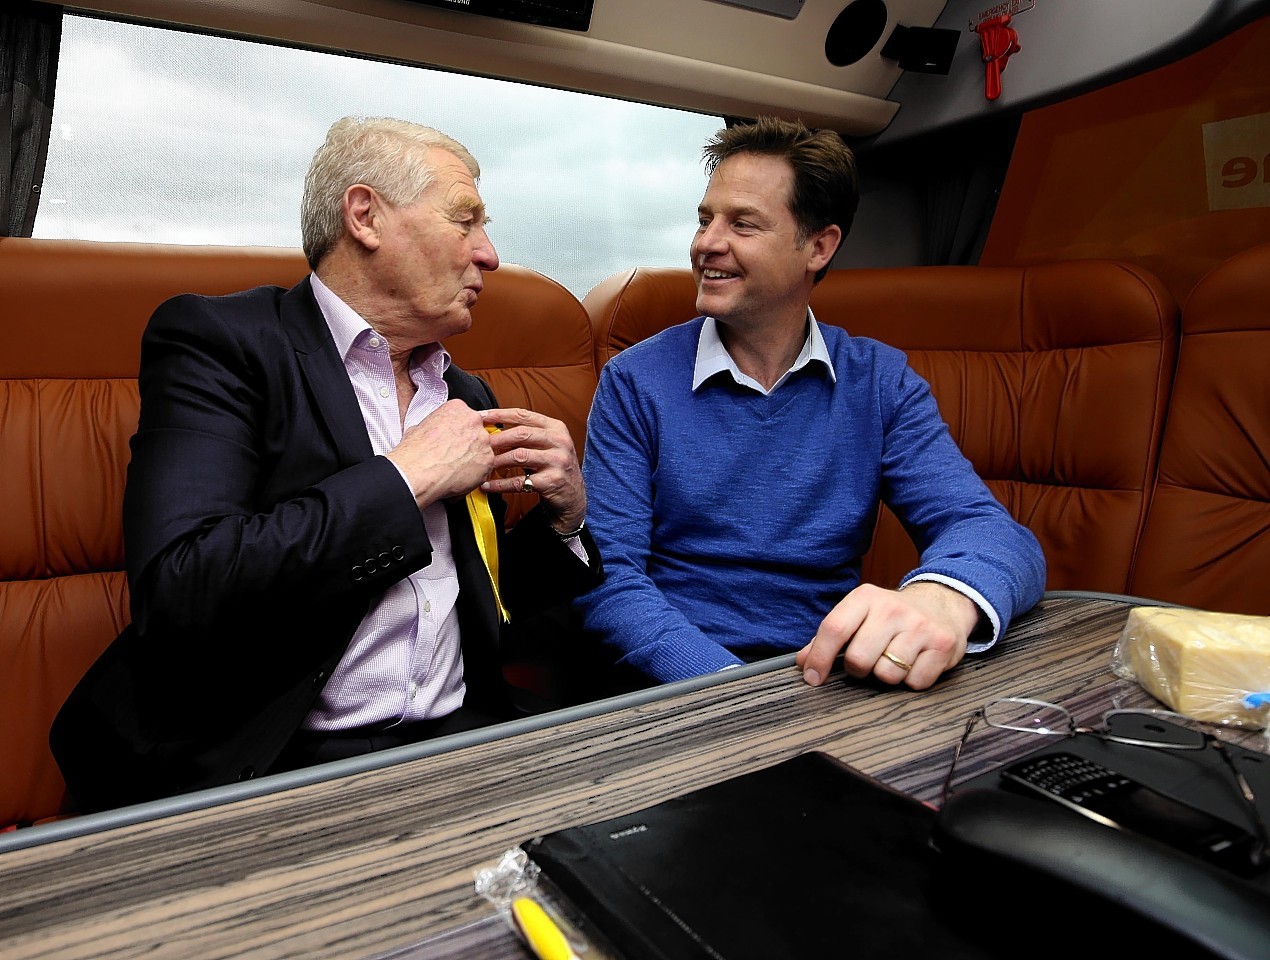 Liberal Democrats leader Nick Clegg talks with Lord Ashdown, Chair of the Liberal Democrats 2015 General Election Team, onboard the battle bus near Taunton, Sommerset